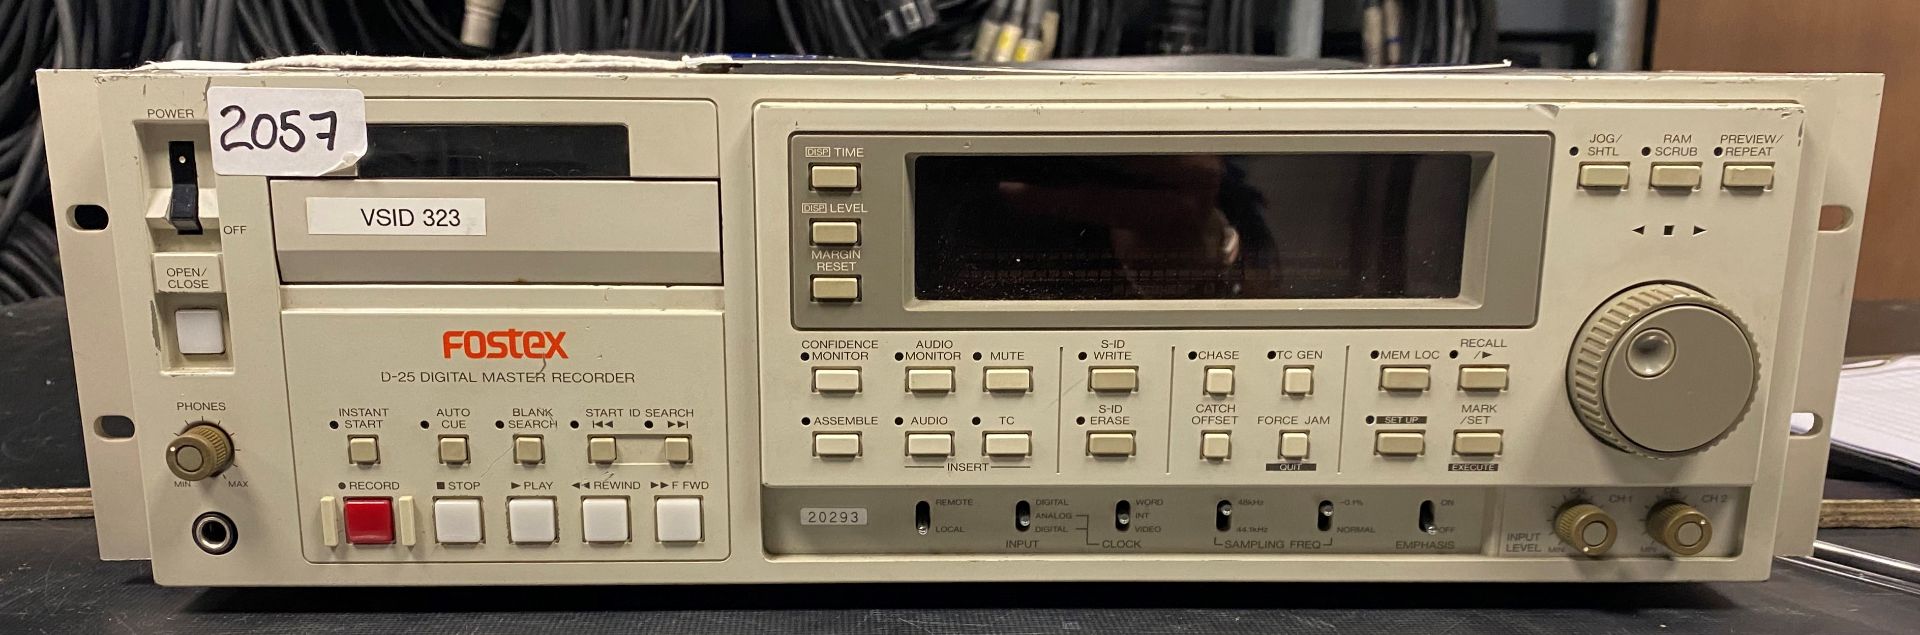 A Fostex Model D-25 Digital Master Recorder (powers up, tape tray faulty).